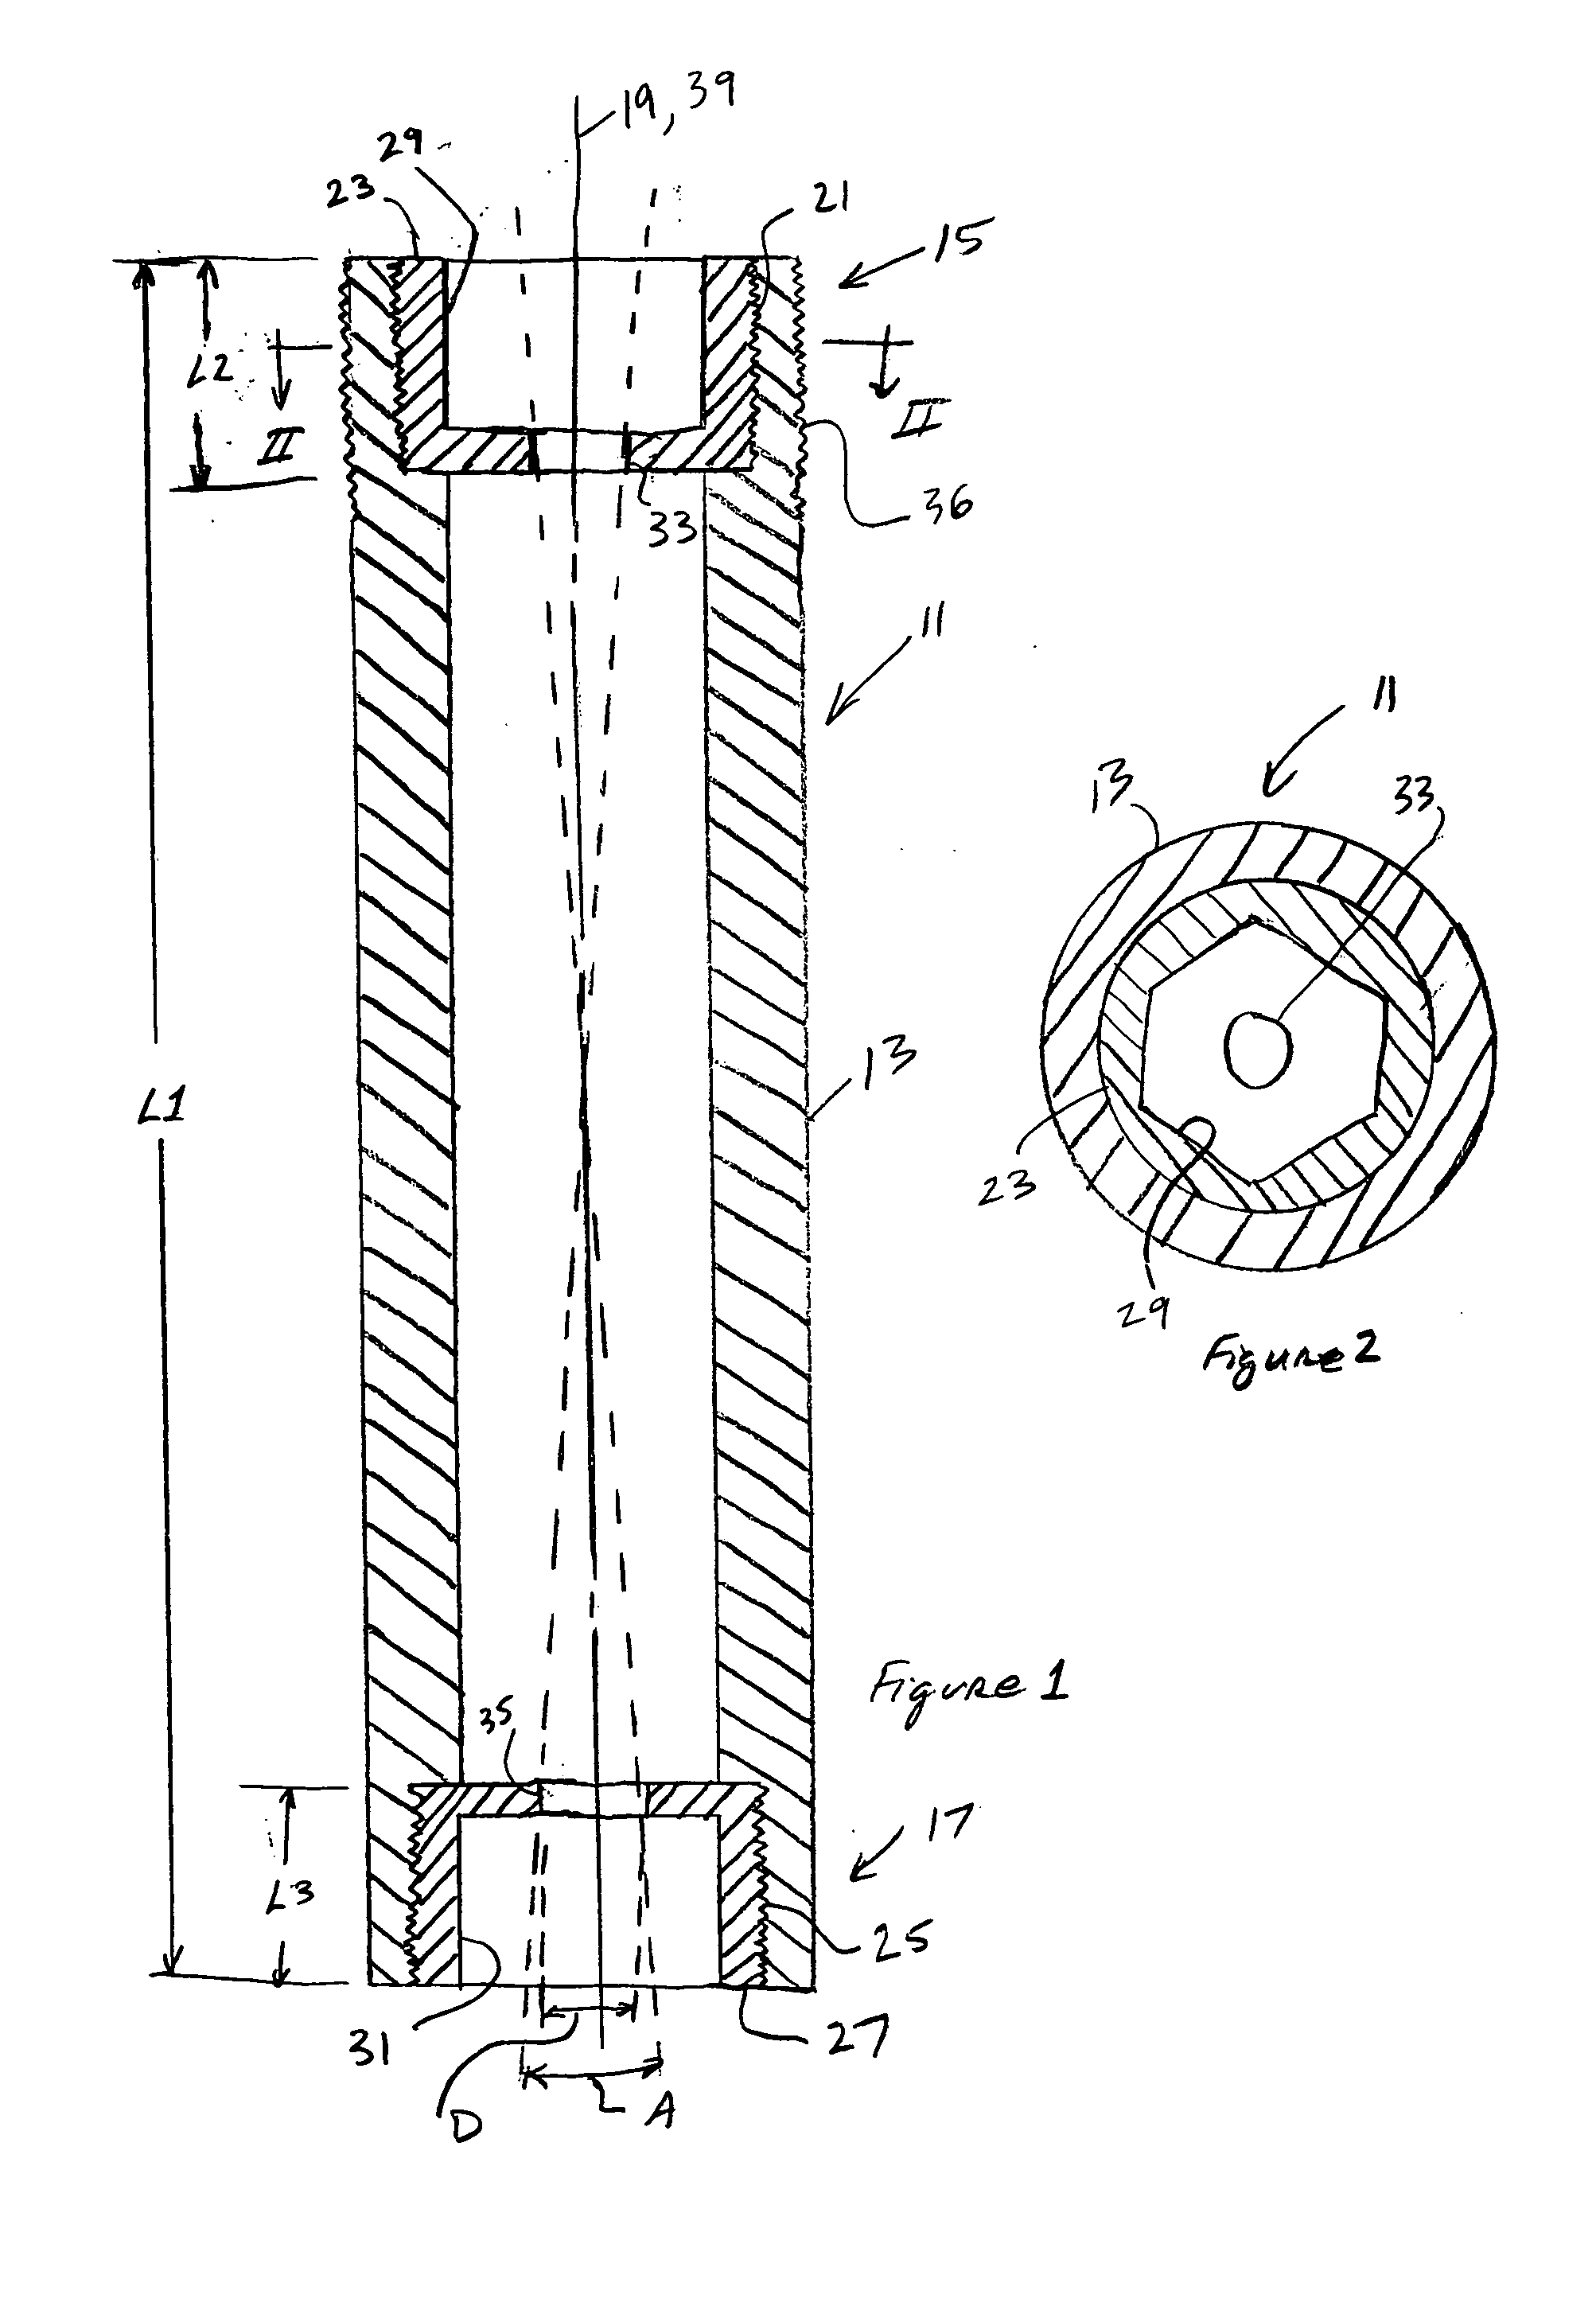 Method and apparatus for locating and aligning fasteners